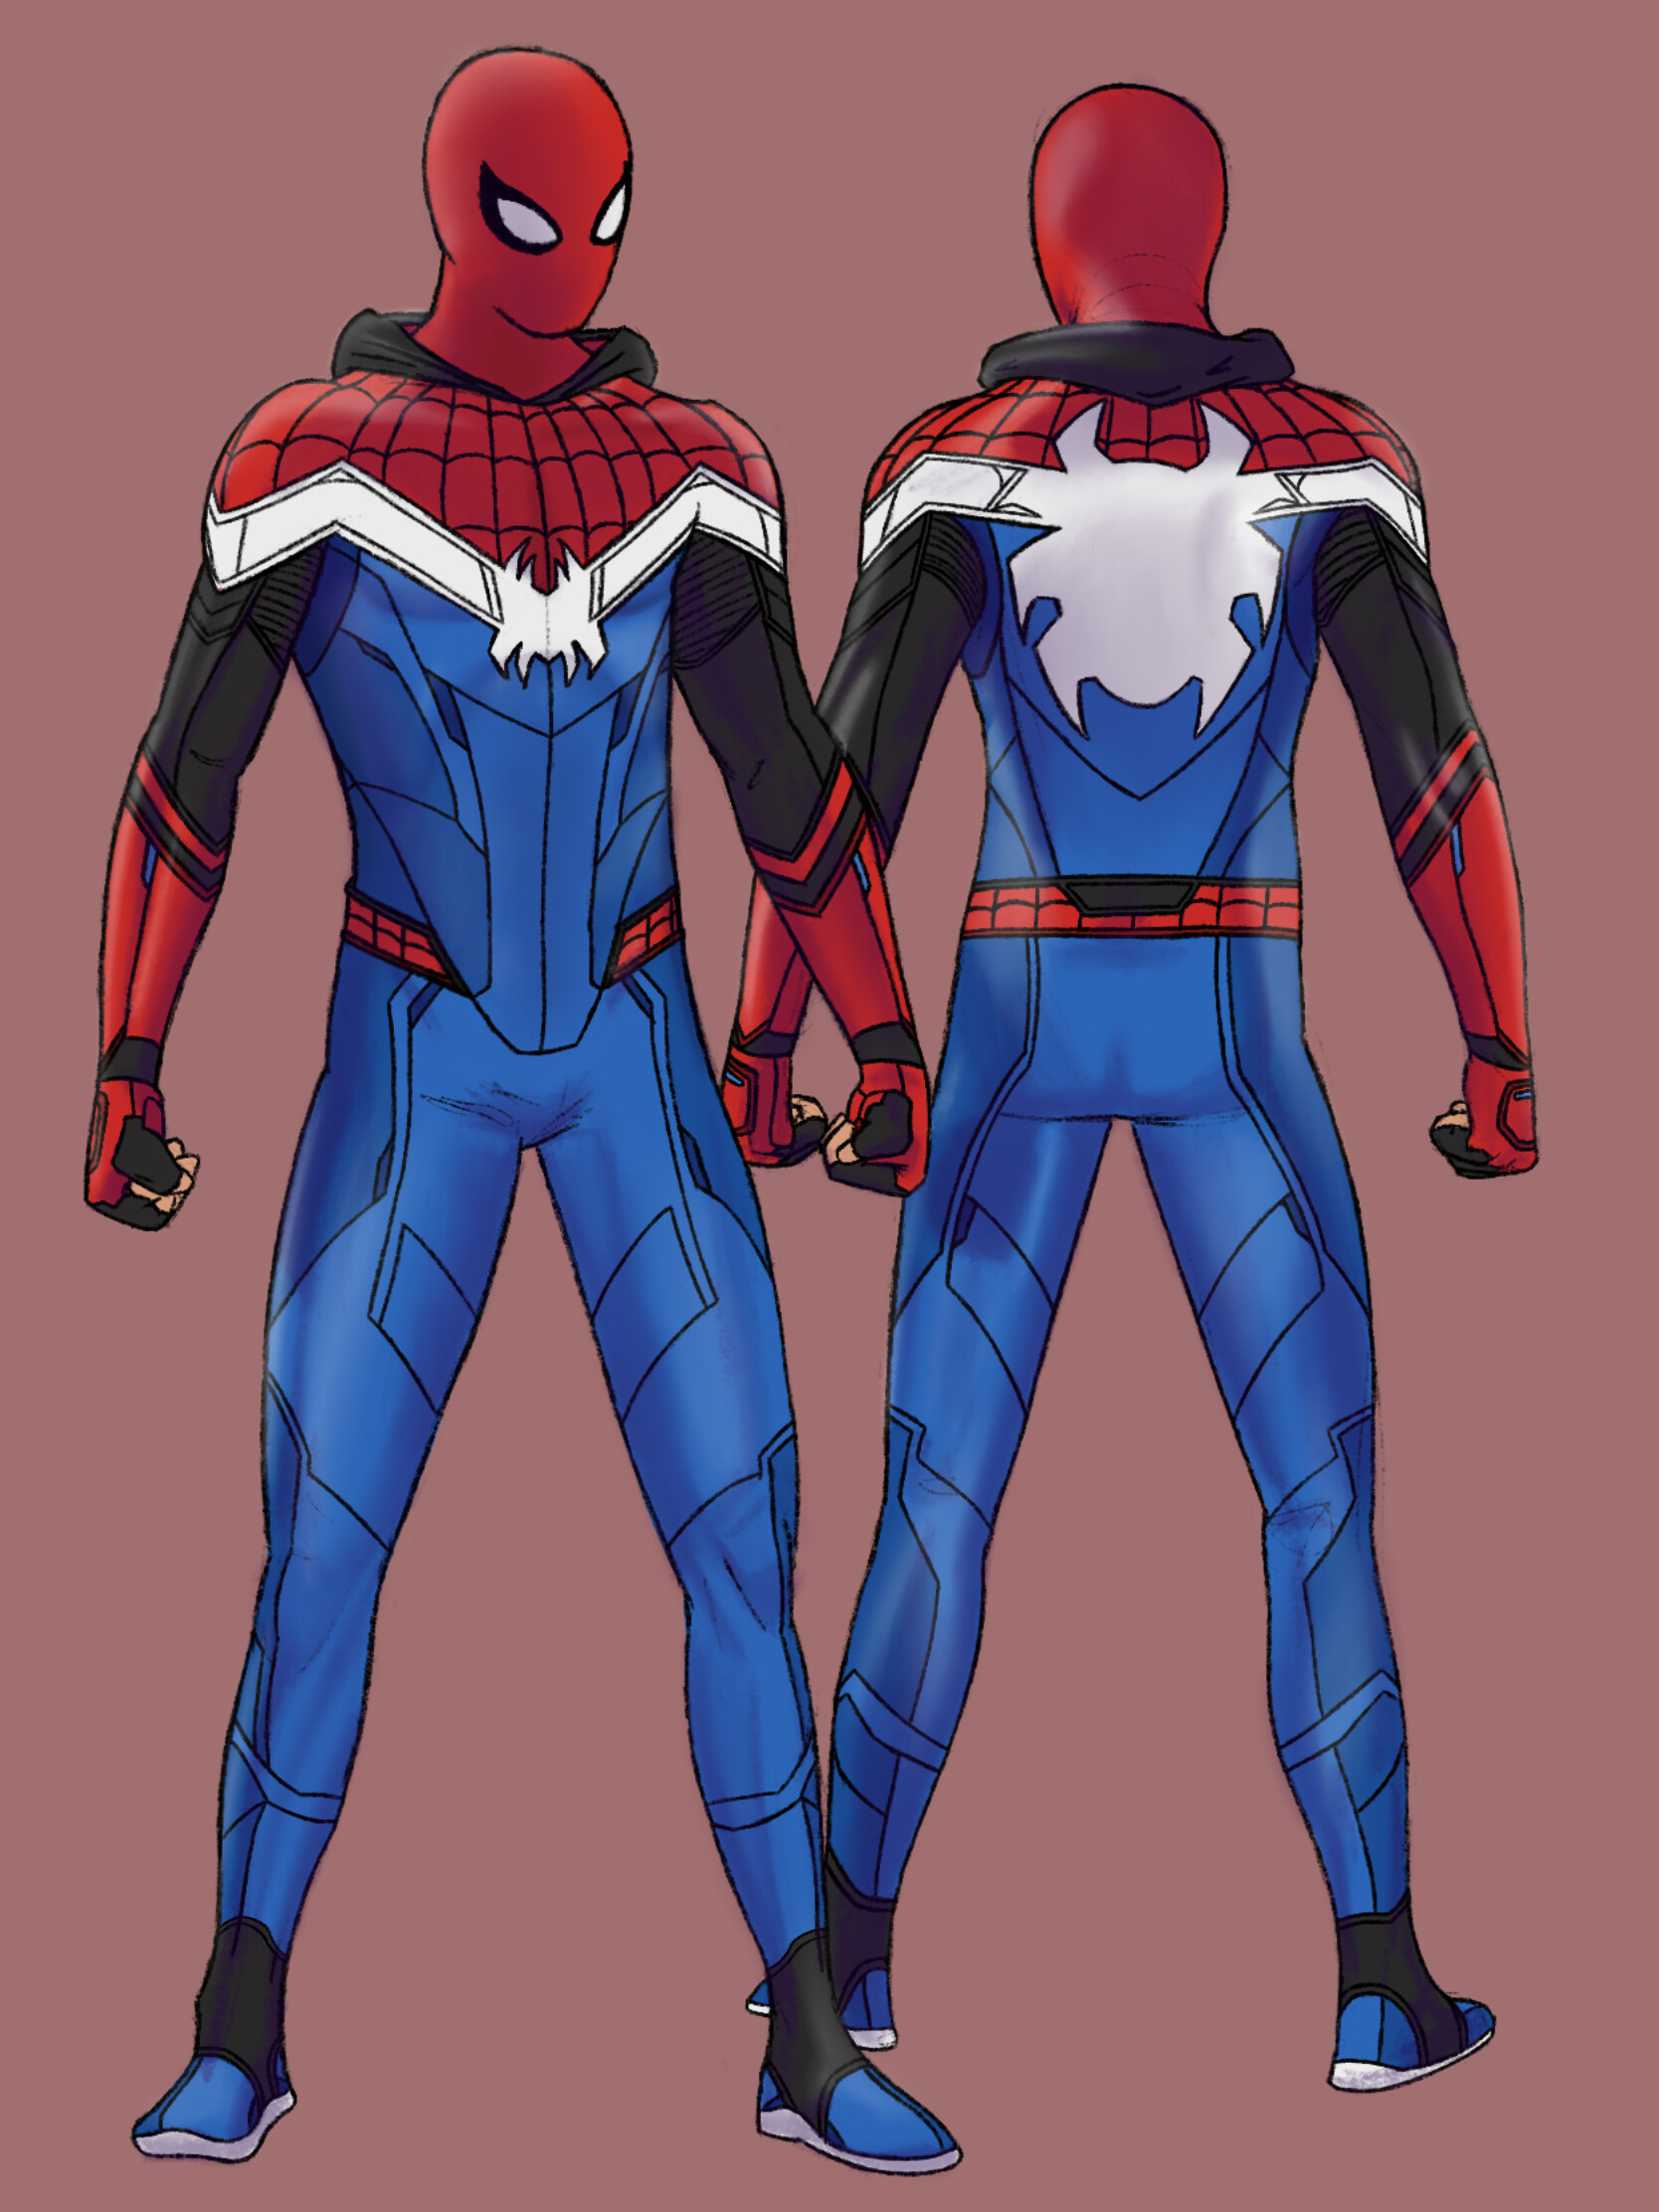 Draw you as a spiderman from spiderverse spidersona by